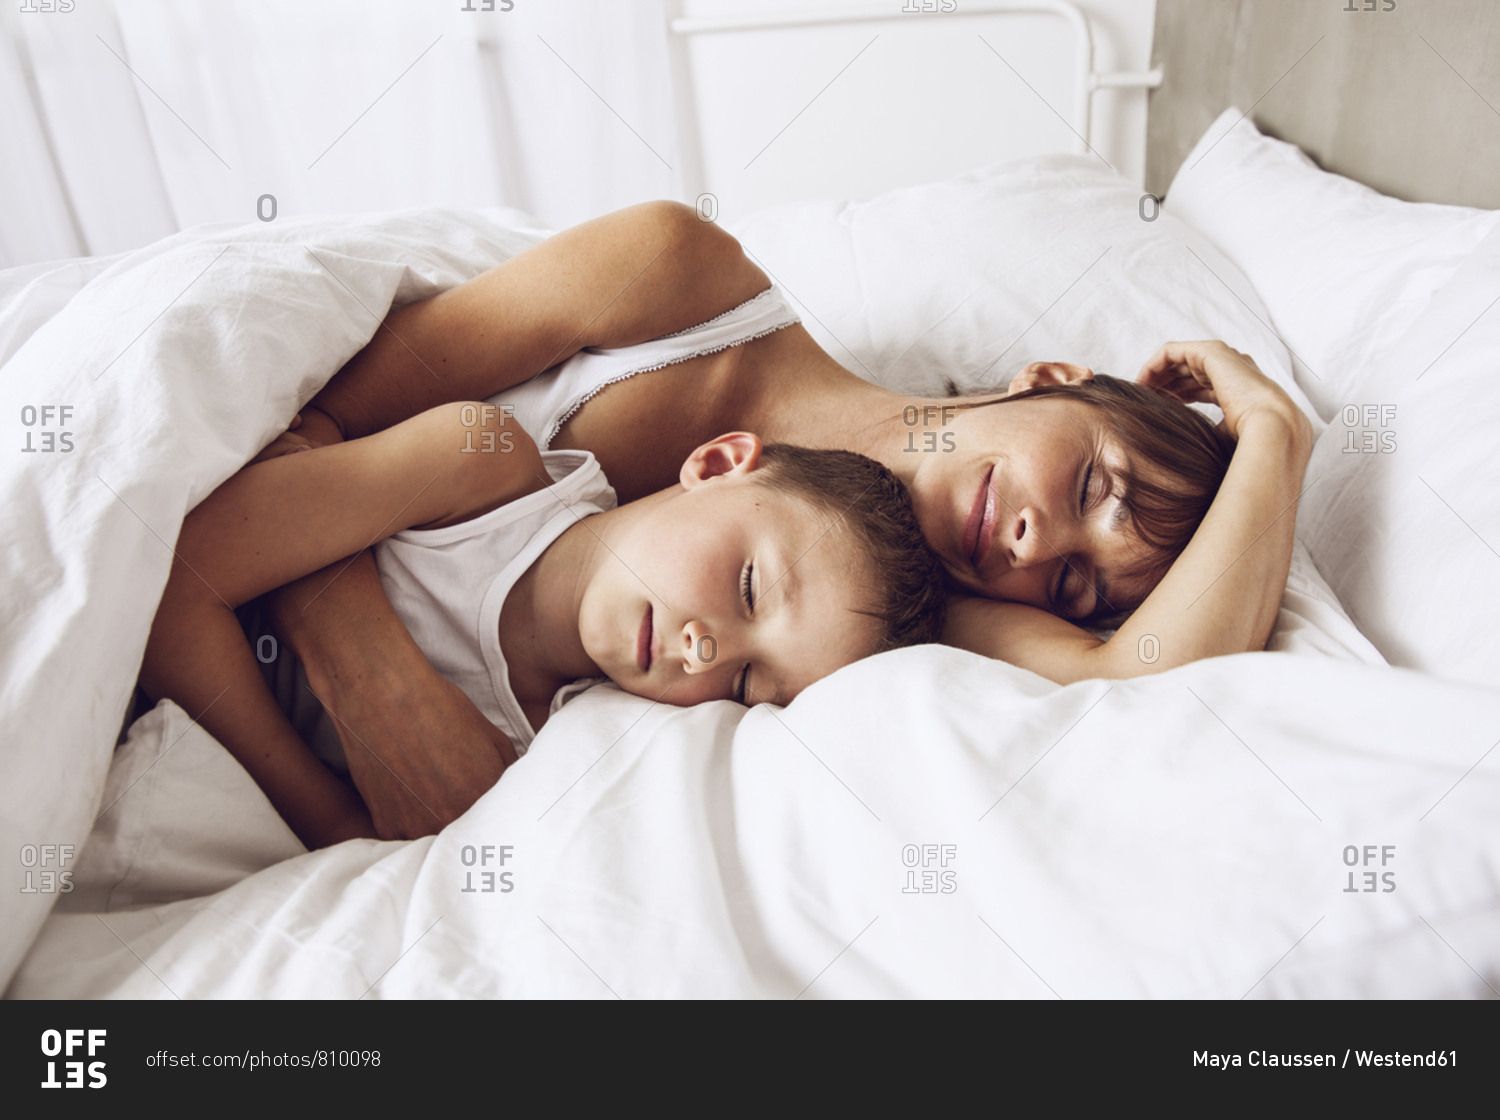 Mom And Son Share Bed Mother and son cuddling in bed stock photo - OFFSET